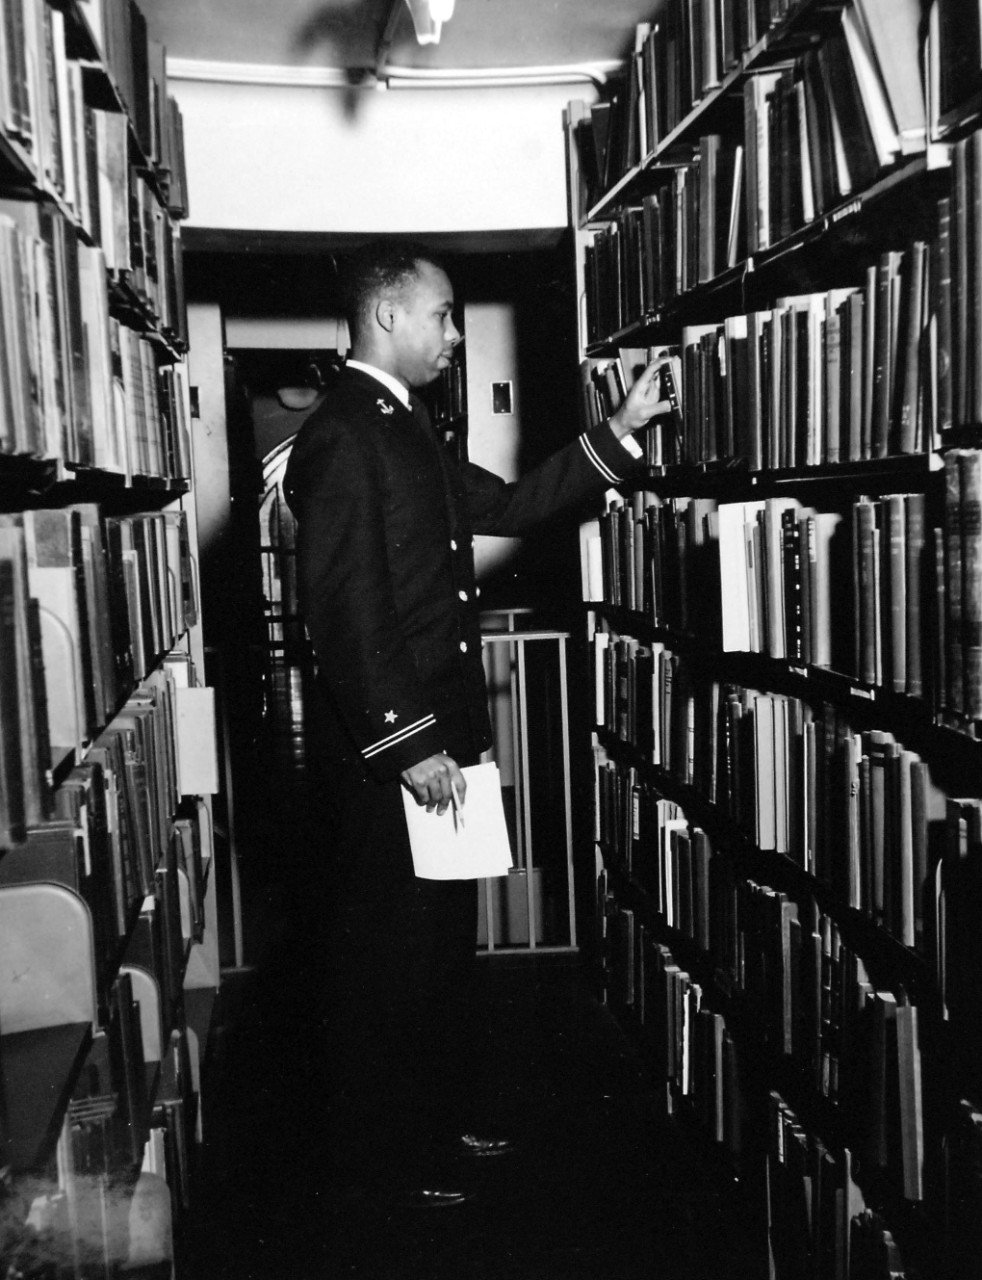 80-G-707012:   Midshipman Wesley Brown, June 1949.   Brown is selecting reference books for first class term paper in the library, released June 3, 1949.  Note, Brown was the first African-American to graduate from the U.S. Naval Academy and served as a Civil Engineer, retiring in June 1969 with the rank of Lieutenant Commander.   Brown died on May 12, 2012.   Official U.S. Navy Photograph, now in the collections of the National Archives.   